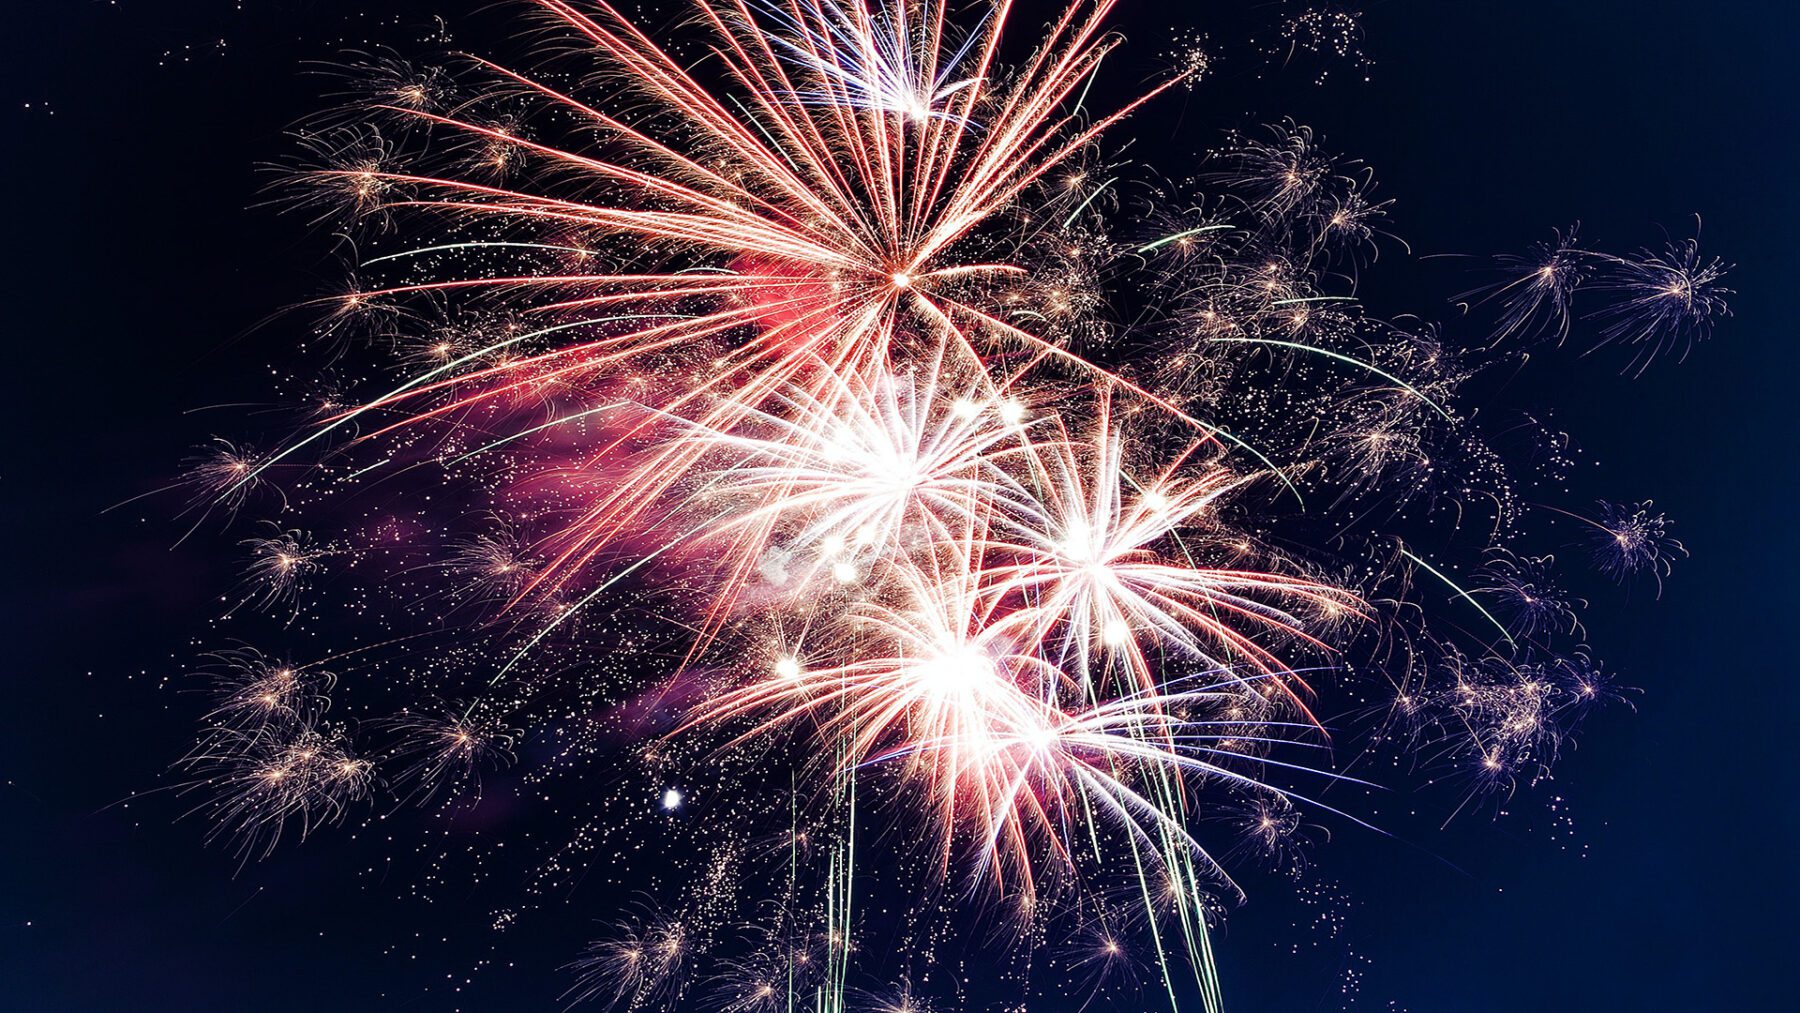 July 4 fireworks show to return to Naperville